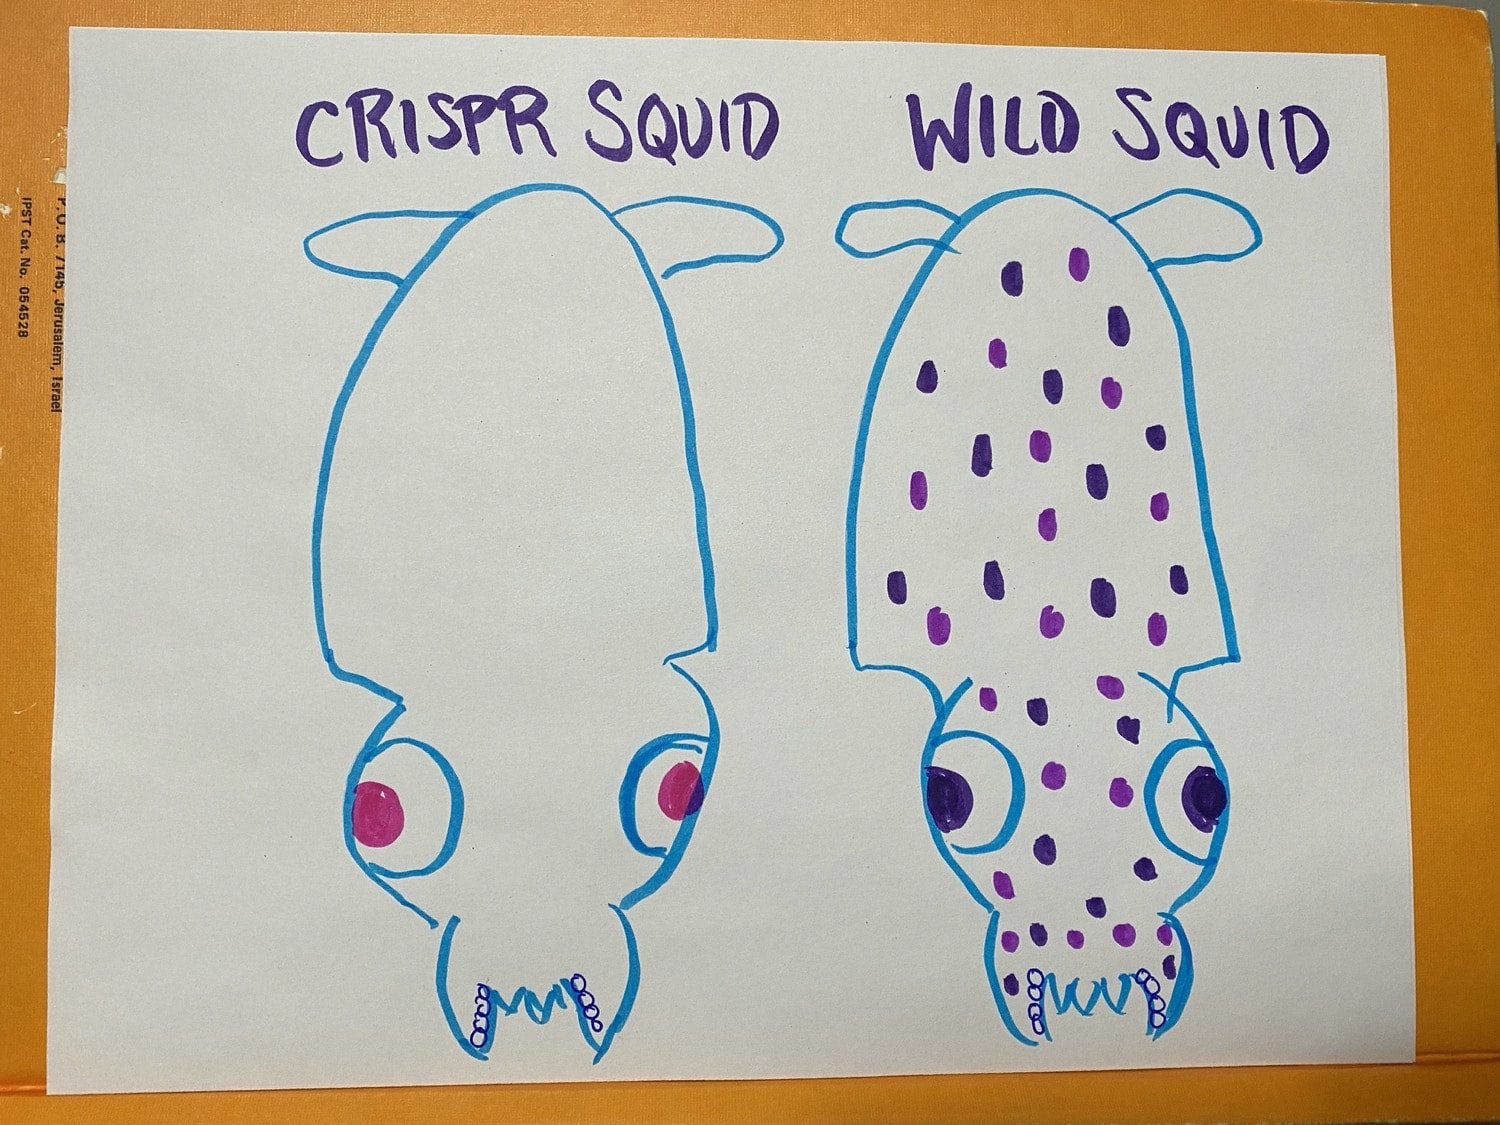 a simple marker drawing of two squids. the crispr squid has a clear body while the wild squid has many spots